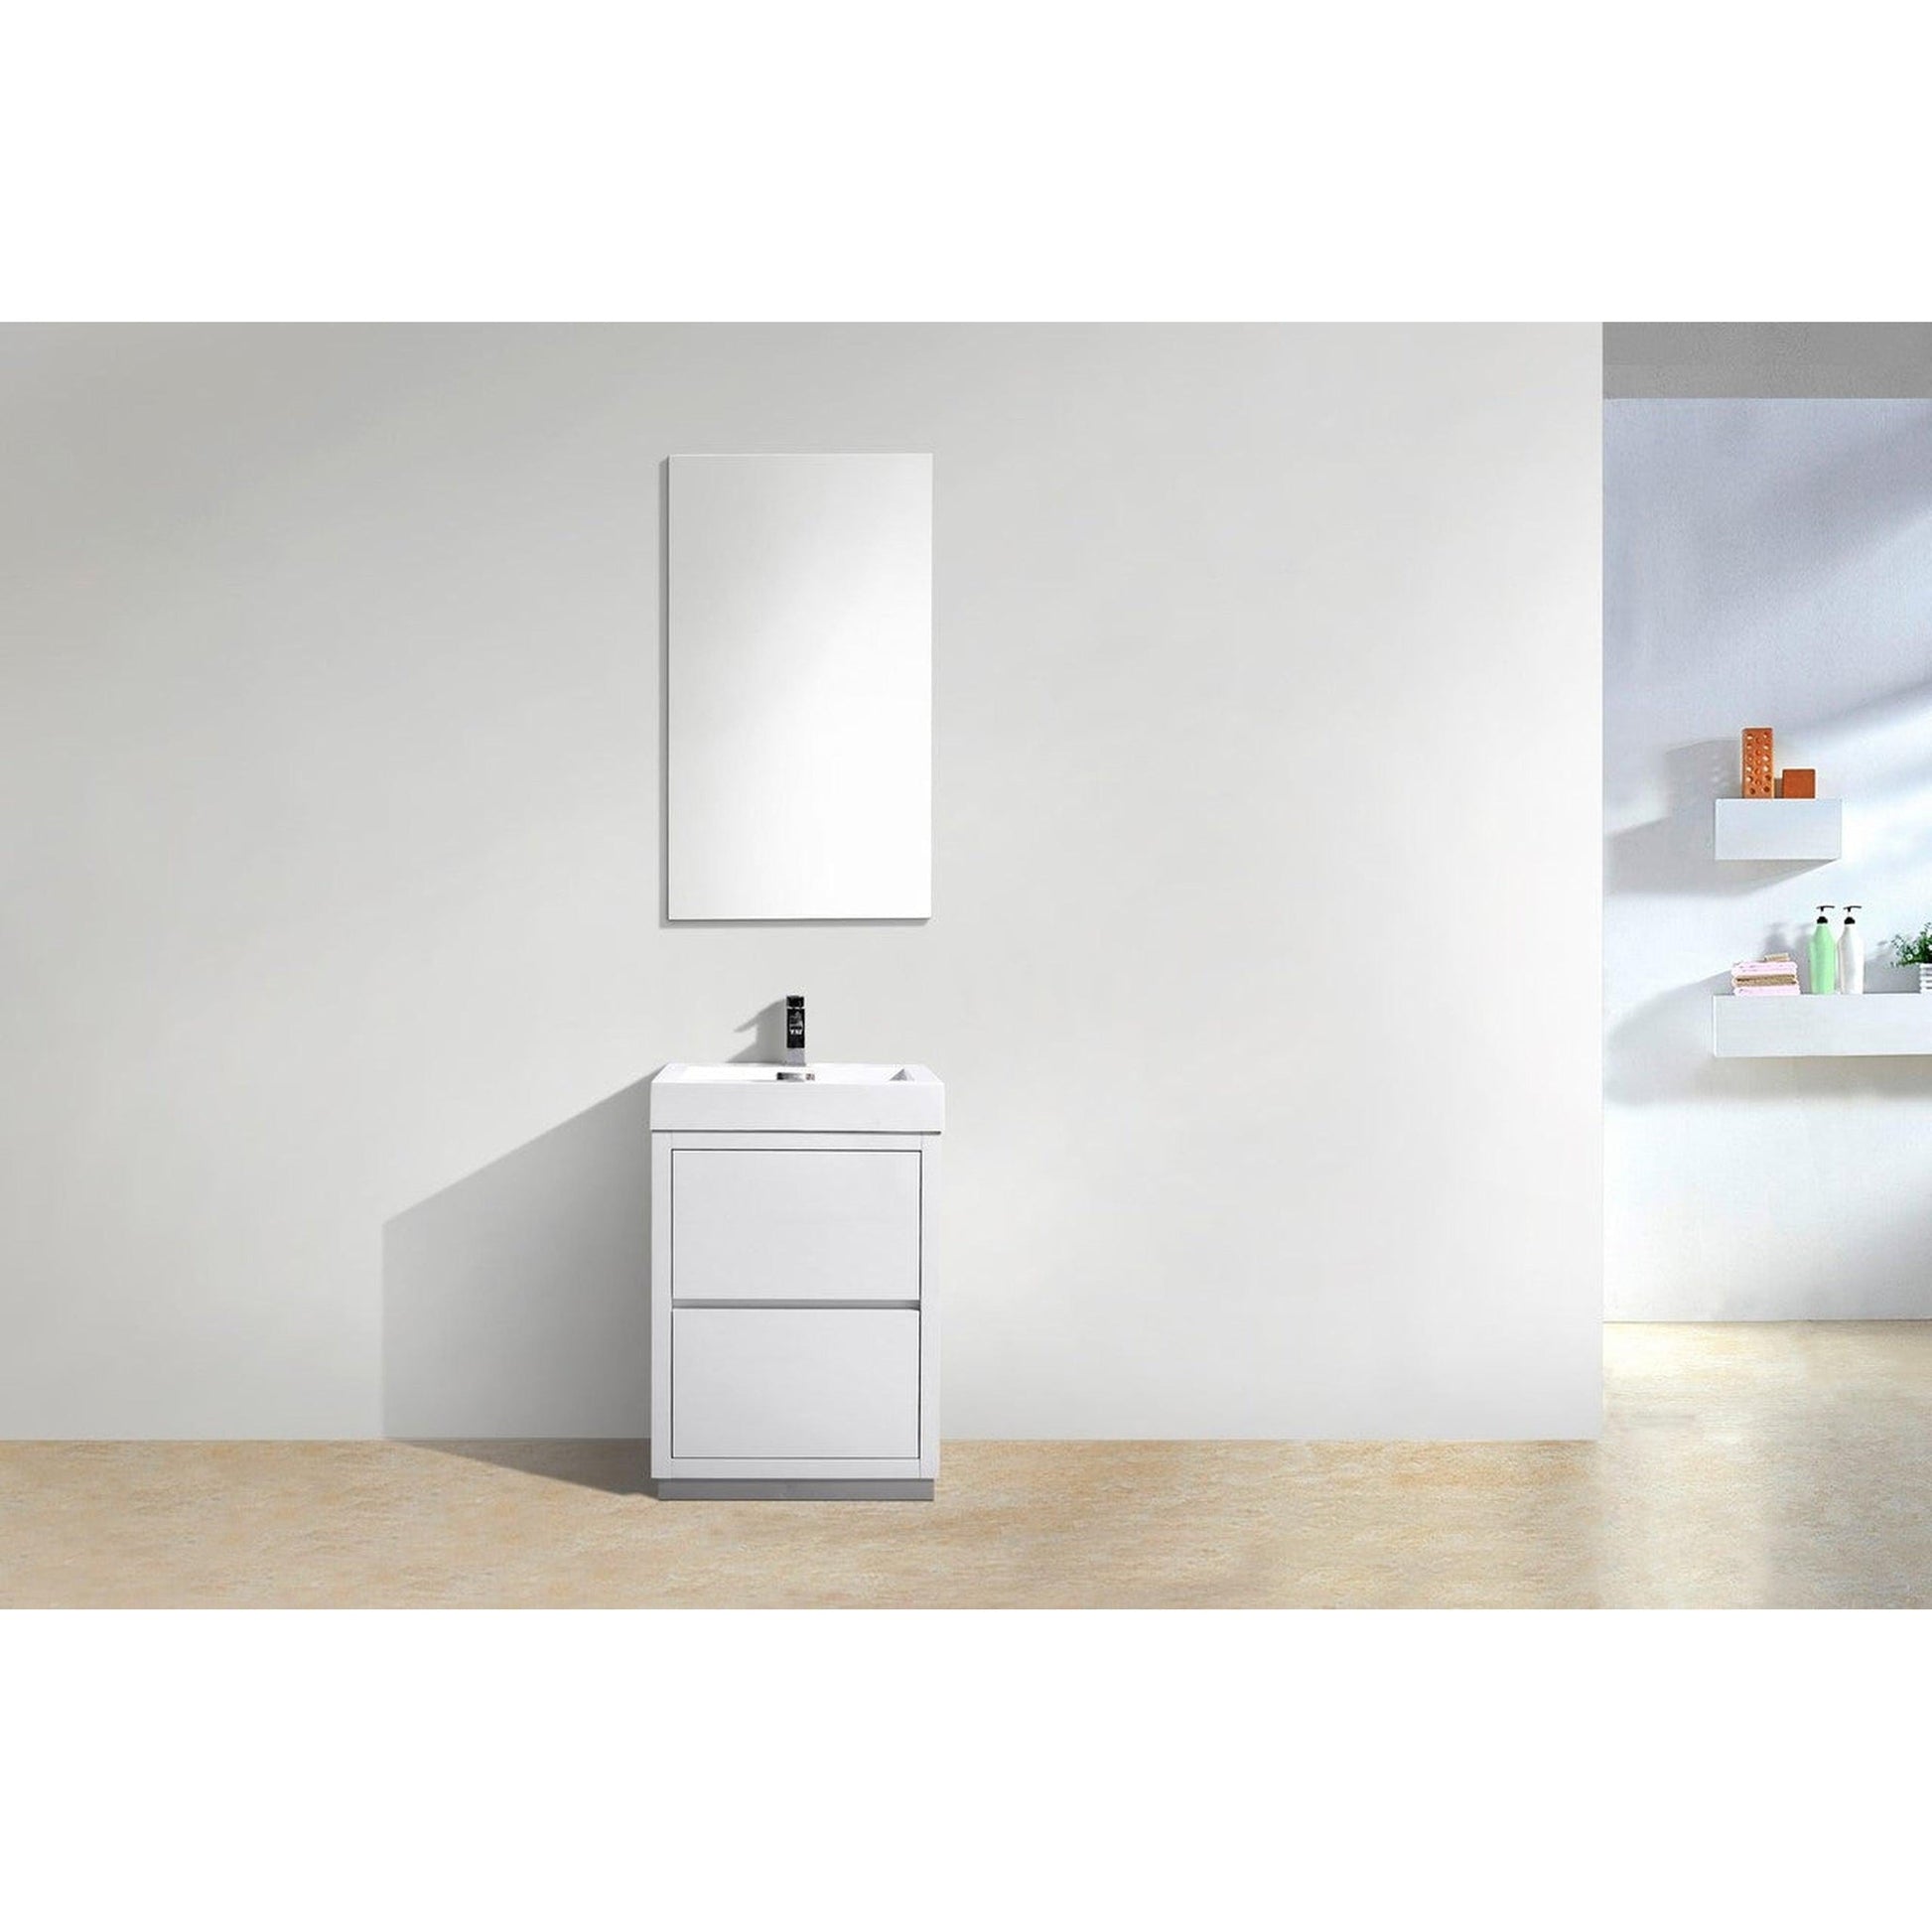 KubeBath Bliss 24" High Gloss White Freestanding Modern Bathroom Vanity With Single Integrated Acrylic Sink With Overflow and 24" White Framed Mirror With Shelf